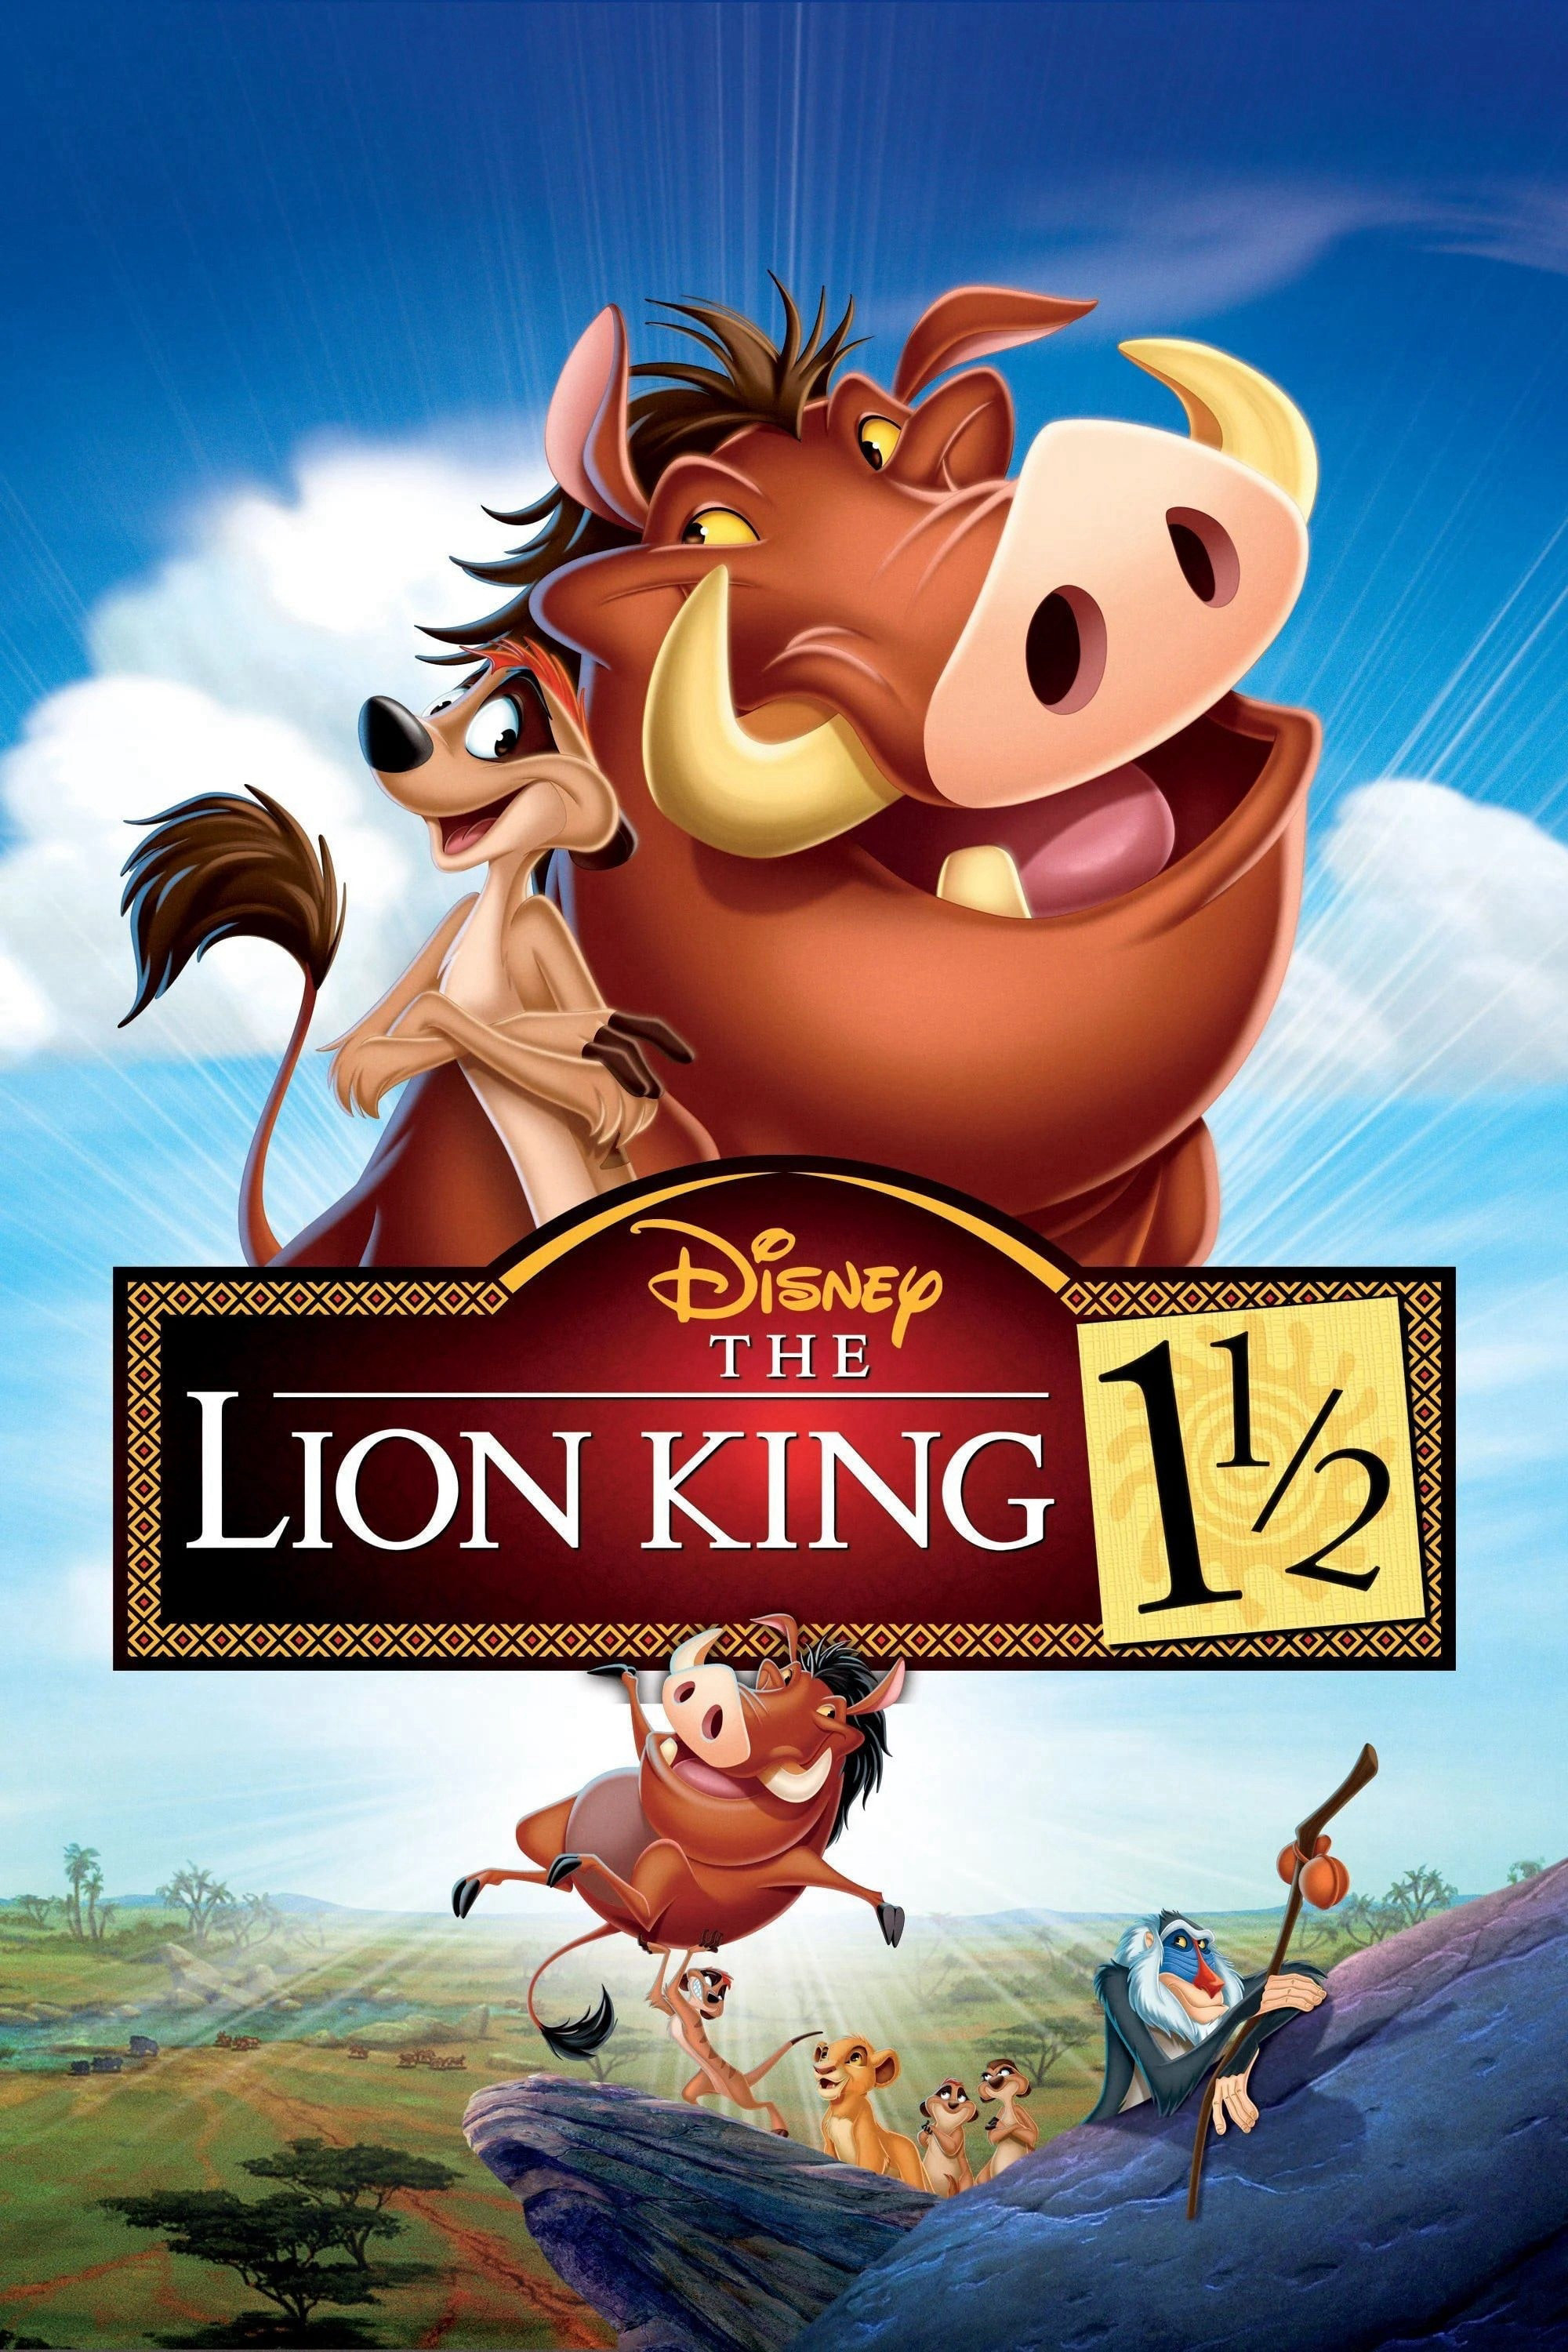 The Lion King 1½ (The Lion King 1½) [2004]